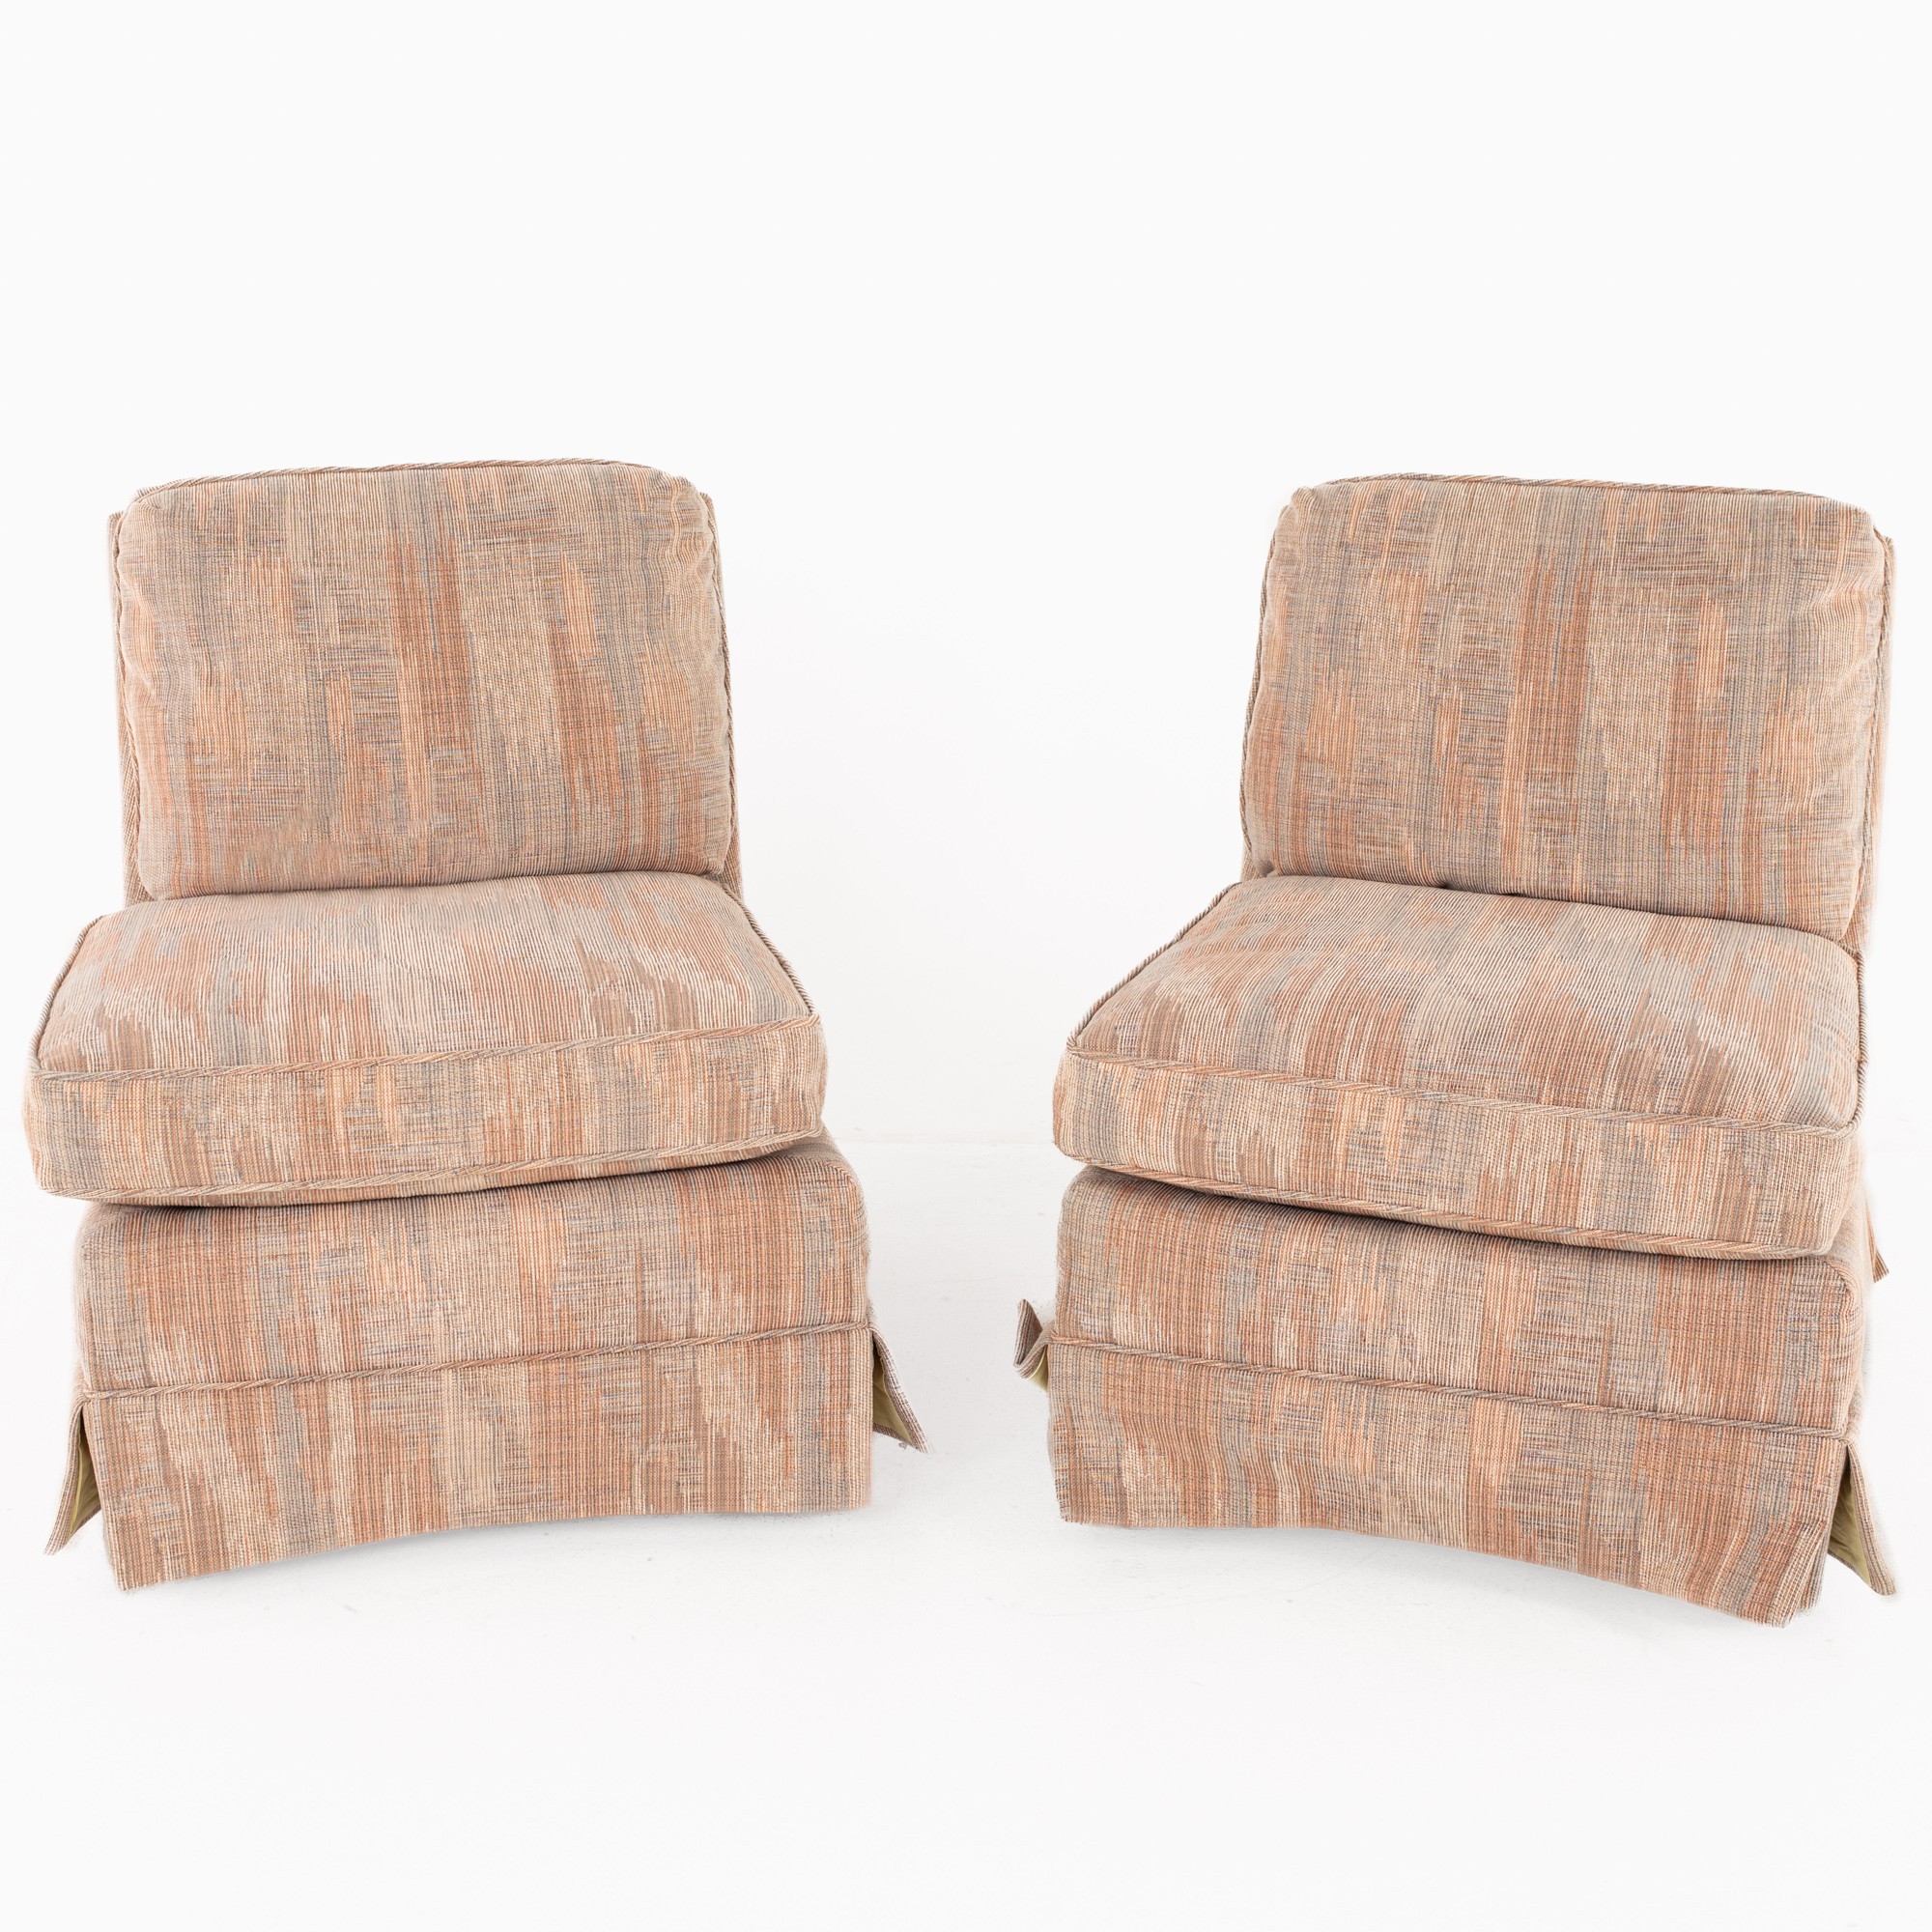 Baker Furniture Mid Century Slipper Chairs - a Pair